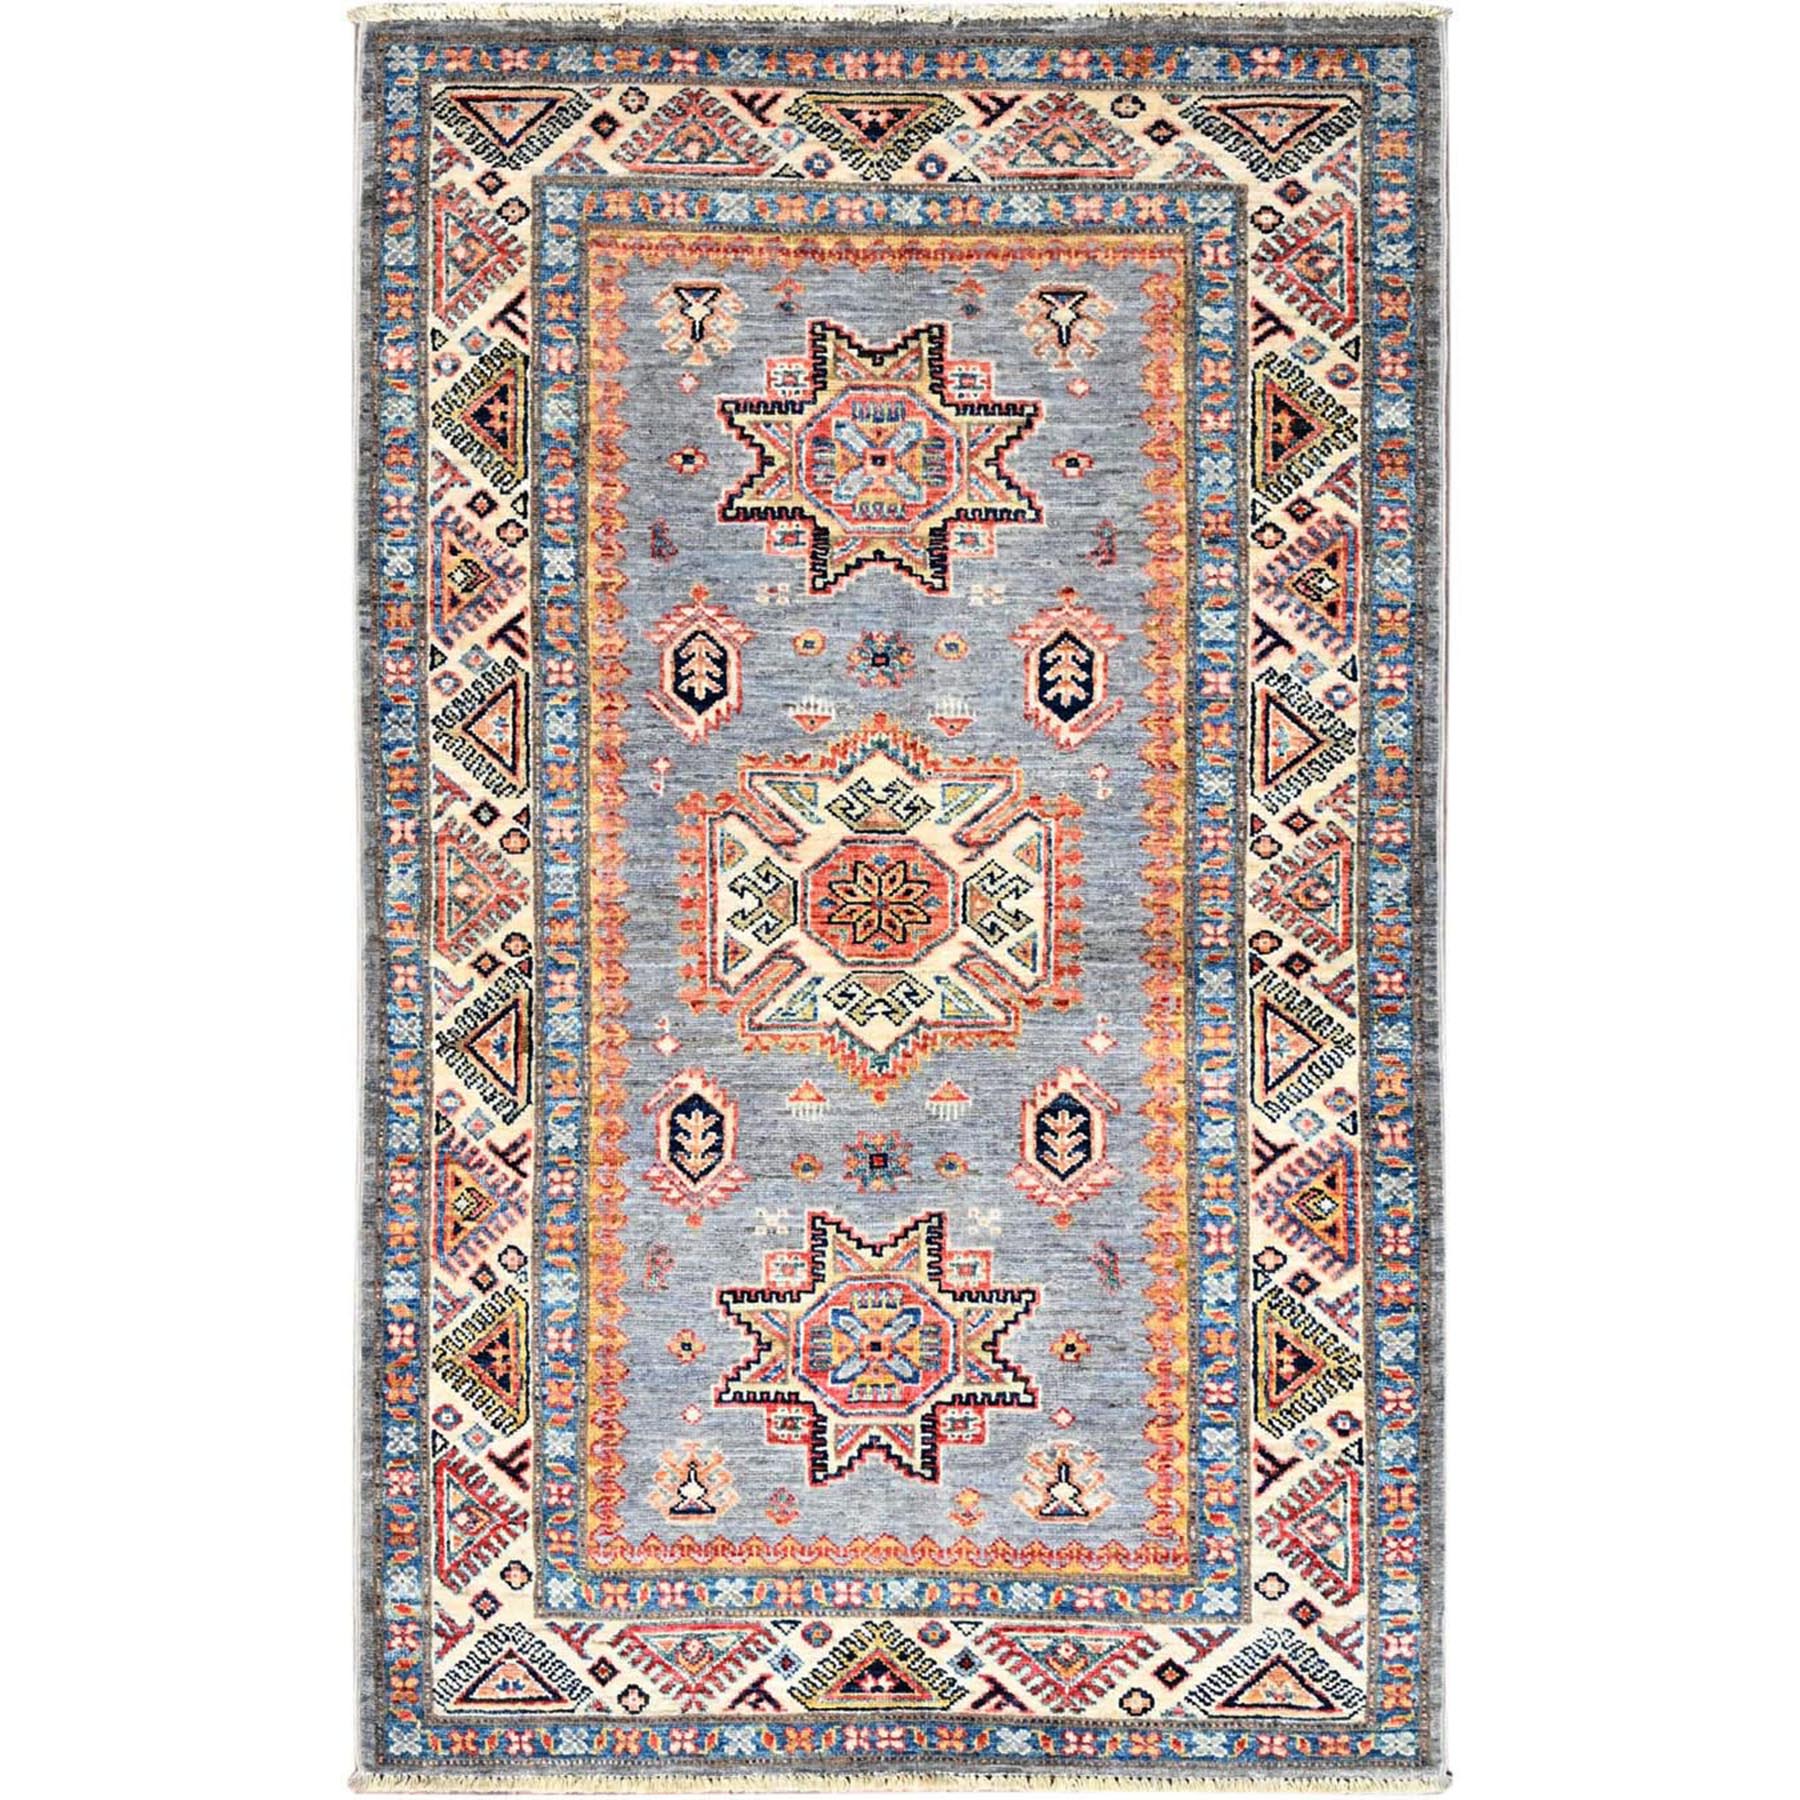  Wool Hand-Knotted Area Rug 3'2